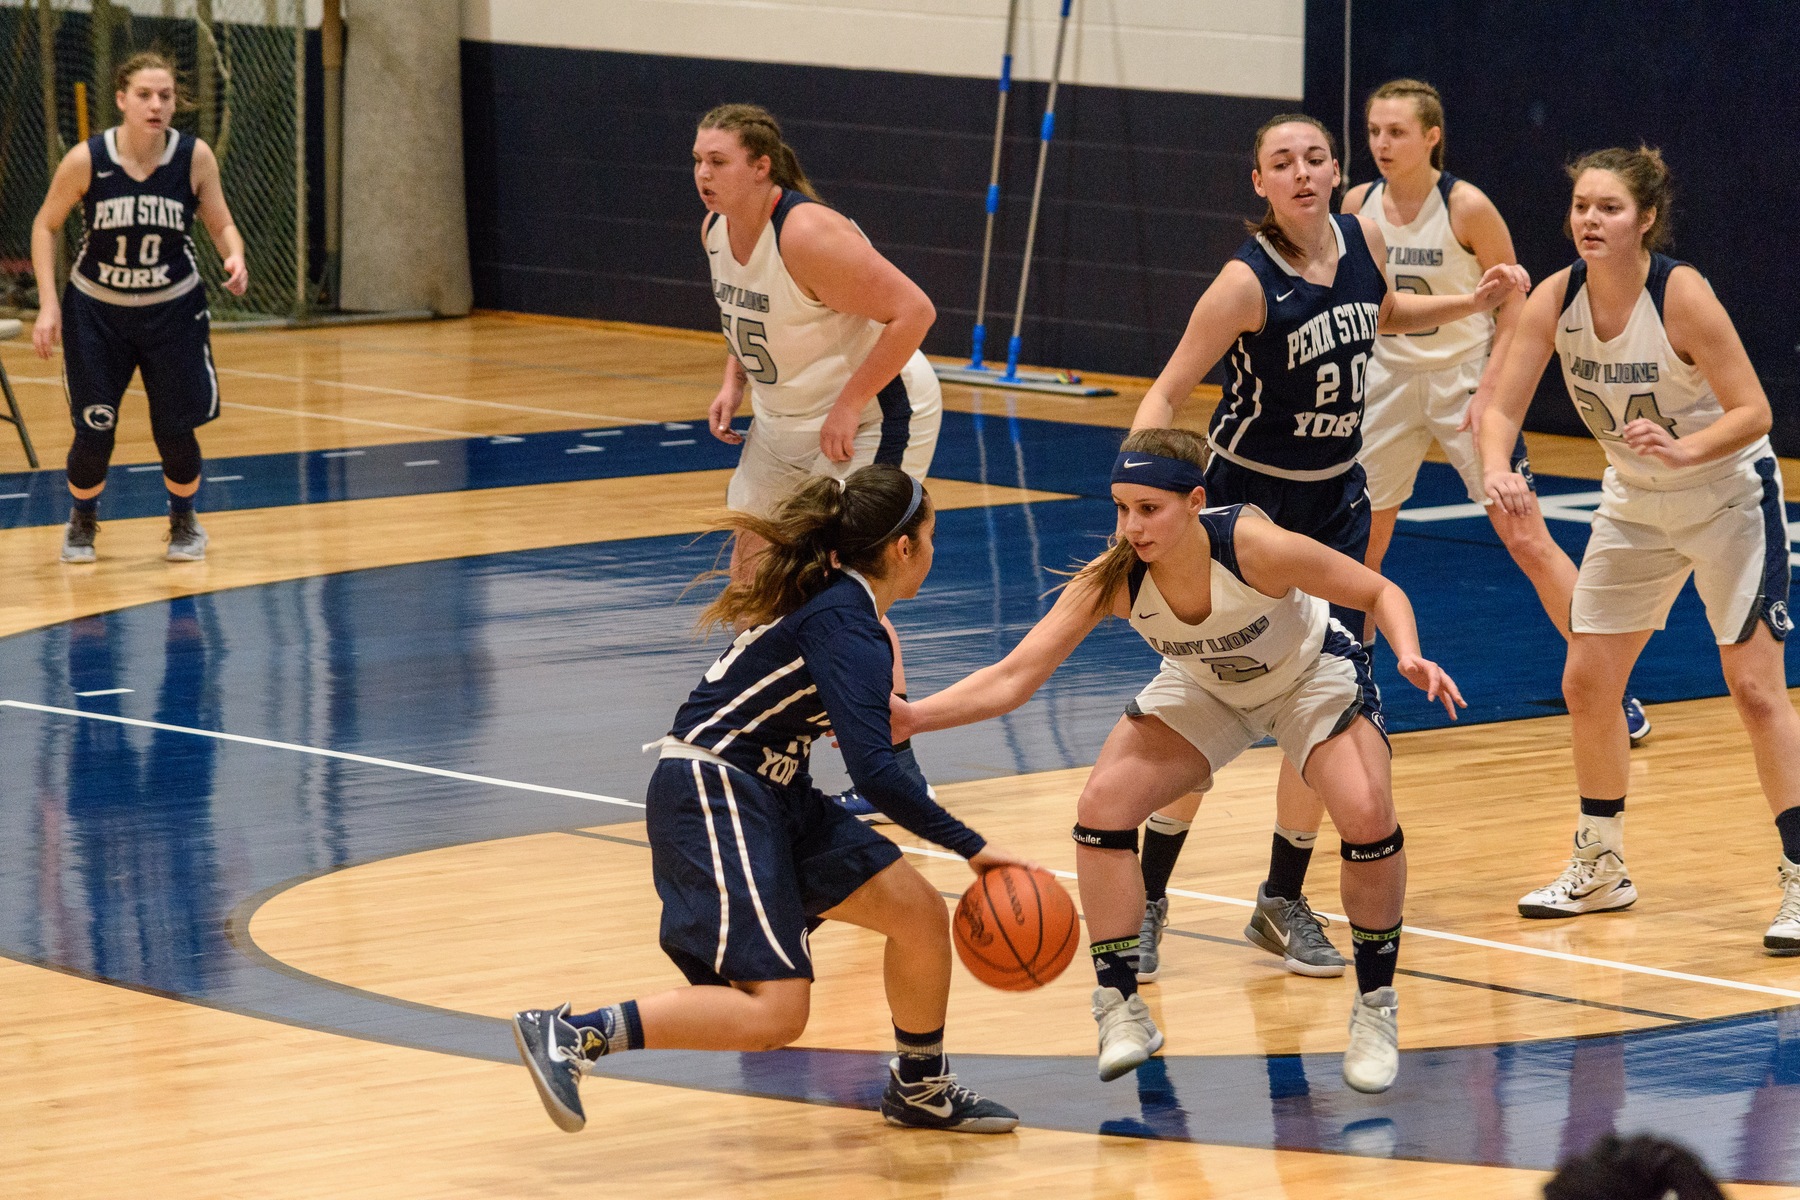 Corina Rivera (with ball) tries to find an opening in the Penn State Schuylkill defense as Karra Thomason (#20) looks on.